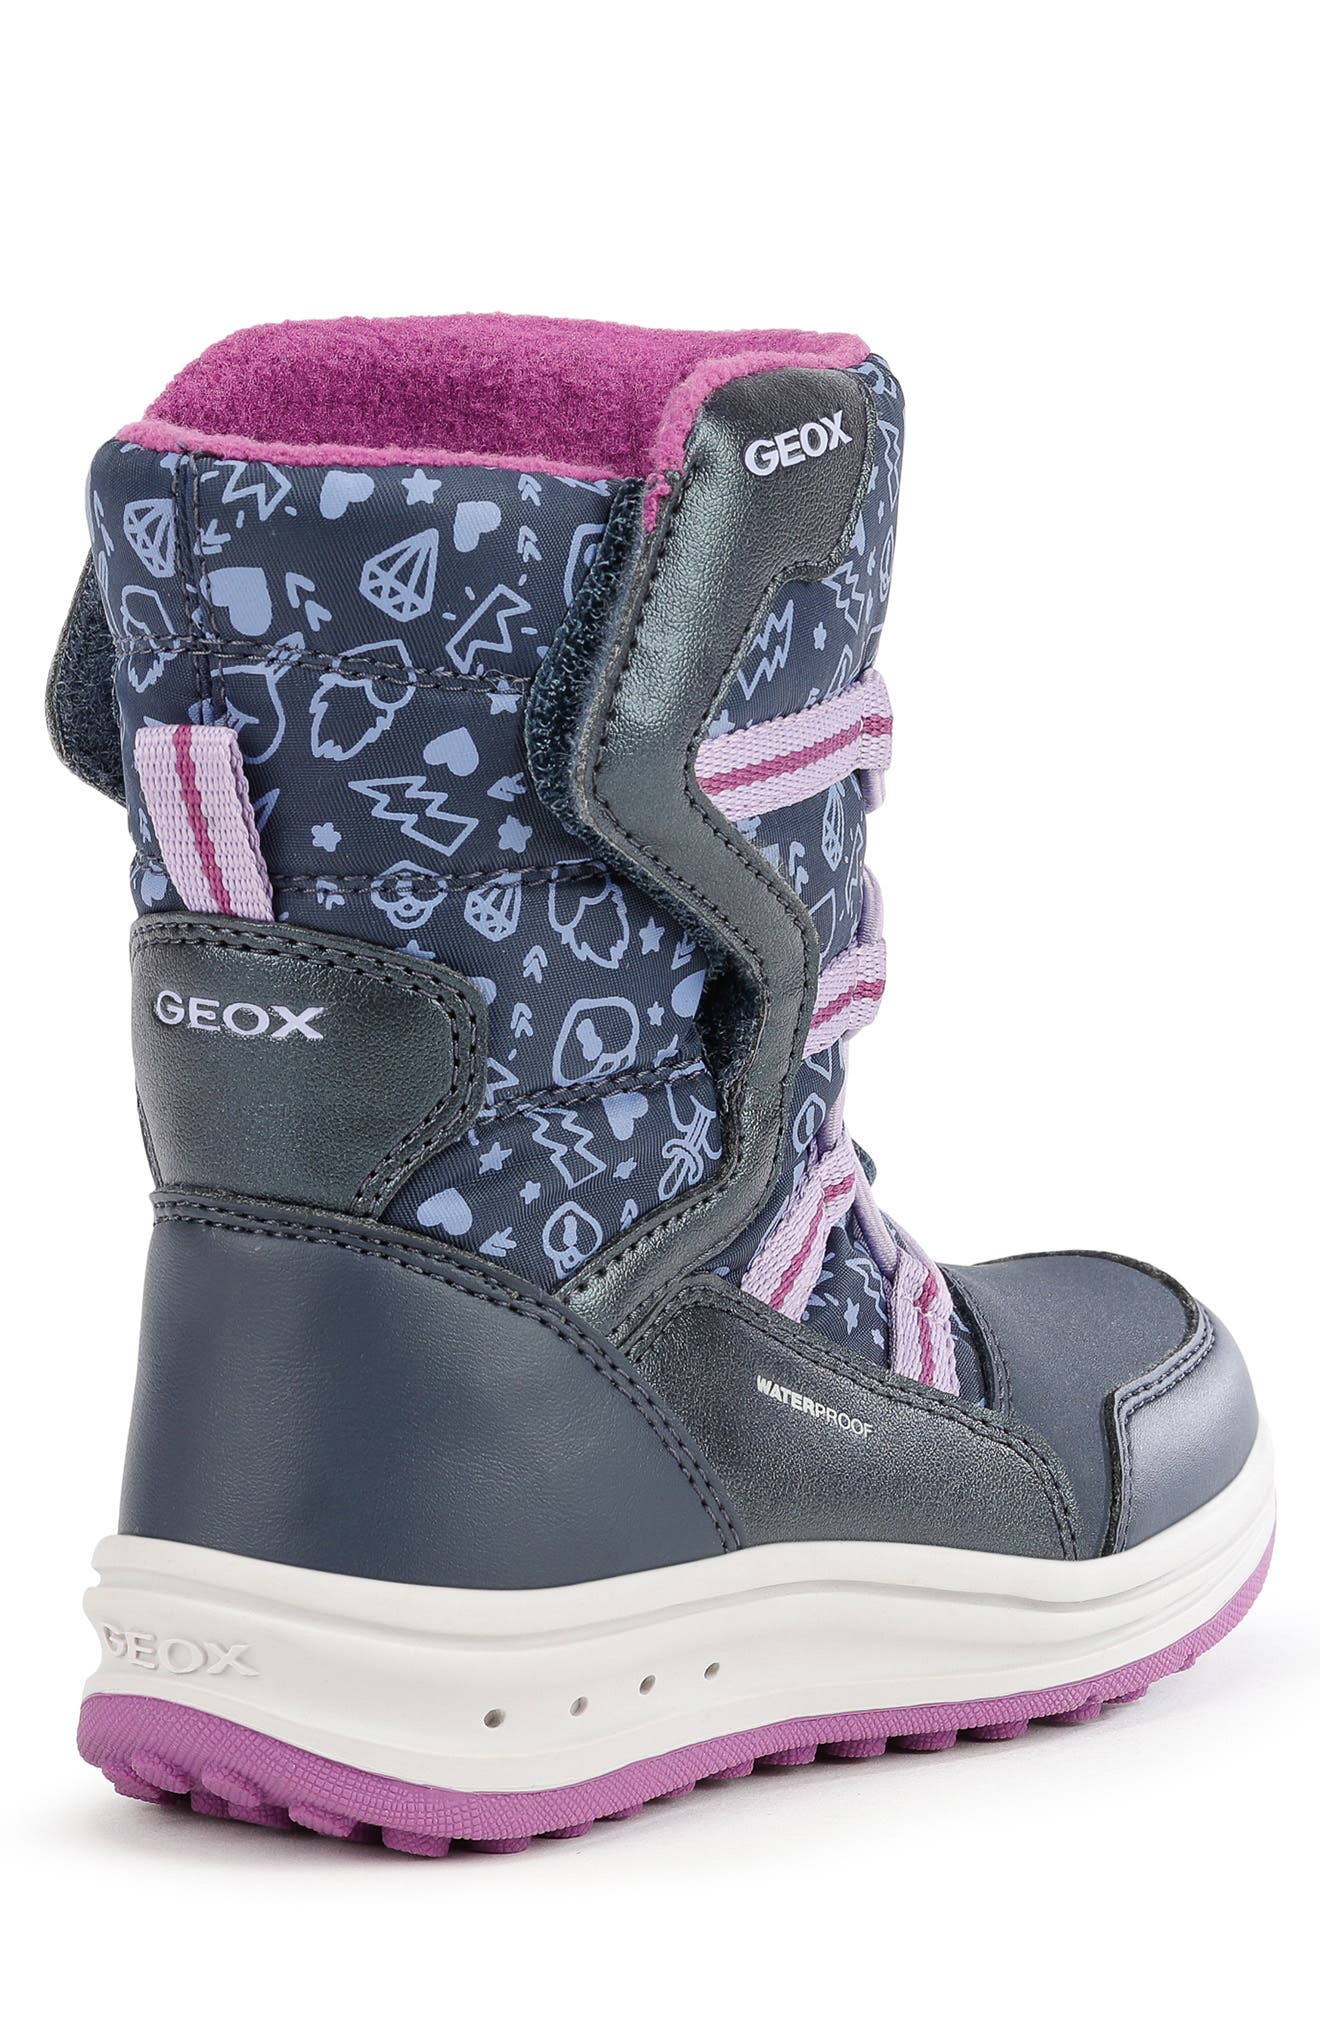 Geox Girls Roby Warm Lined T Boots LACE Grey/Fuch